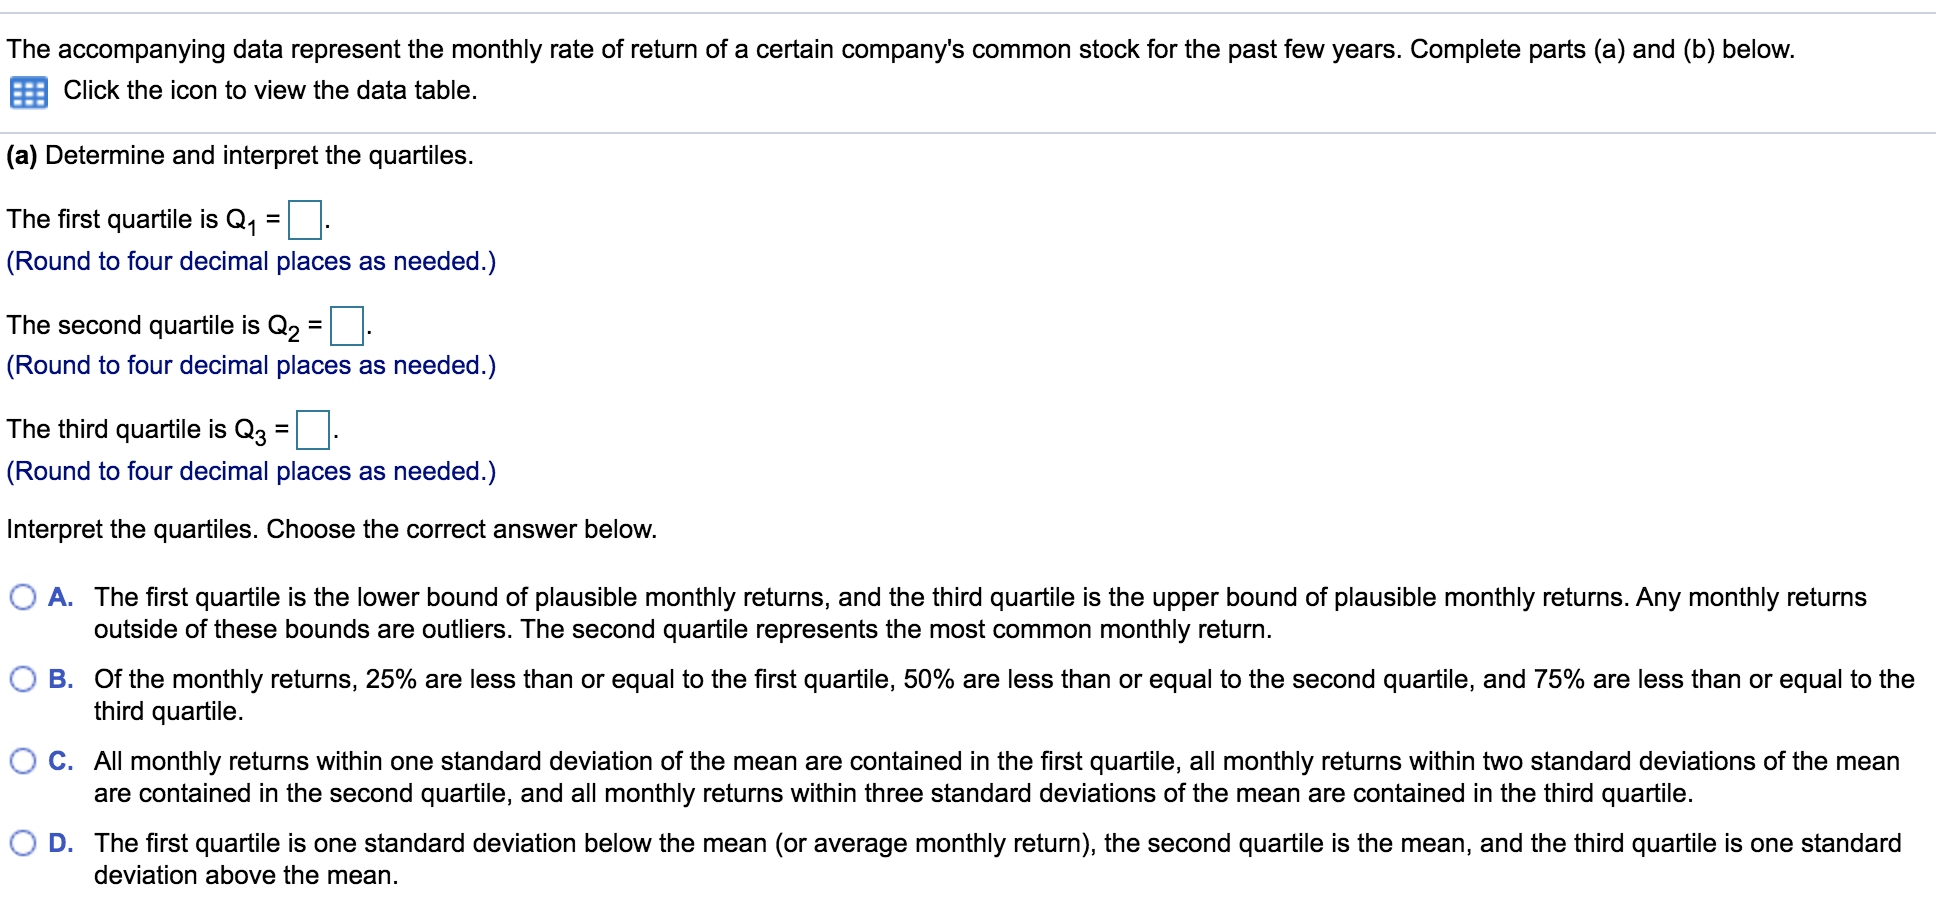 The accompanying data represent the monthly rate of return of a certain company's common stock for the past few years. Complete parts (a) and (b) below.
Click the icon to view the data table.
(a) Determine and interpret the quartiles.
The first quartile is Q1 =
(Round to four decimal places as needed.)
The second quartile is Q2 =
(Round to four decimal places as needed.)
The third quartile is Q3
%3D
(Round to four decimal places as needed.)
Interpret the quartiles. Choose the correct answer below.
O A. The first quartile is the lower bound of plausible monthly returns, and the third quartile is the upper bound of plausible monthly returns. Any monthly returns
outside of these bounds are outliers. The second quartile represents the most common monthly return.
B. Of the monthly returns, 25% are less than or equal to the first quartile, 50% are less than or equal to the second quartile, and 75% are less than or equal to the
third quartile.
C. All monthly returns within one standard deviation of the mean are contained in the first quartile, all monthly returns within two standard deviations of the mean
are contained in the second quartile, and all monthly returns within three standard deviations of the mean are contained in the third quartile.
D. The first quartile is one standard deviation below the mean (or average monthly return), the second quartile is the mean, and the third quartile is one standard
deviation above the mean.
